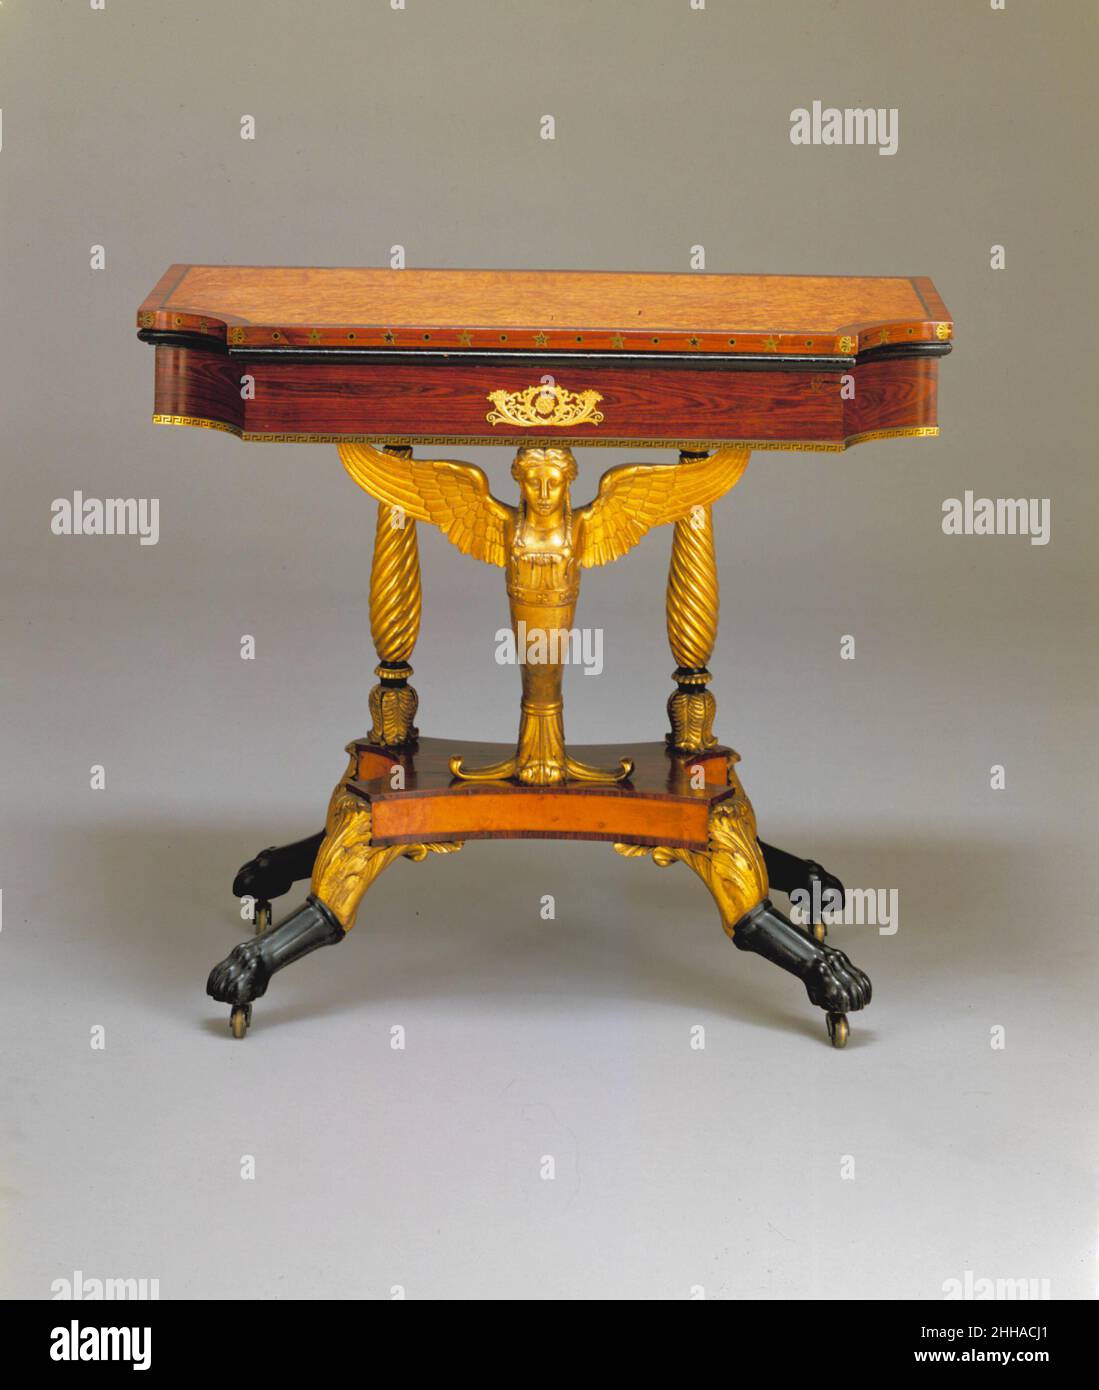 Card Table 1810–19 Attributed to Charles-Honoré Lannuier Although it does not bear Lannuier’s label, this table is nearly identical to six pairs of tables and three single tables that do. It demonstrates Lannuier’s skillful combination of French influences. The gilded, winged caryatid and the hocked animal legs are reminiscent of illustrations in Pierre de La Mésangère’s 'Collection de meubles et objets de gout' (1802–35), which includes motifs often found in Lannuier’s work.. Card Table  1444 Stock Photo